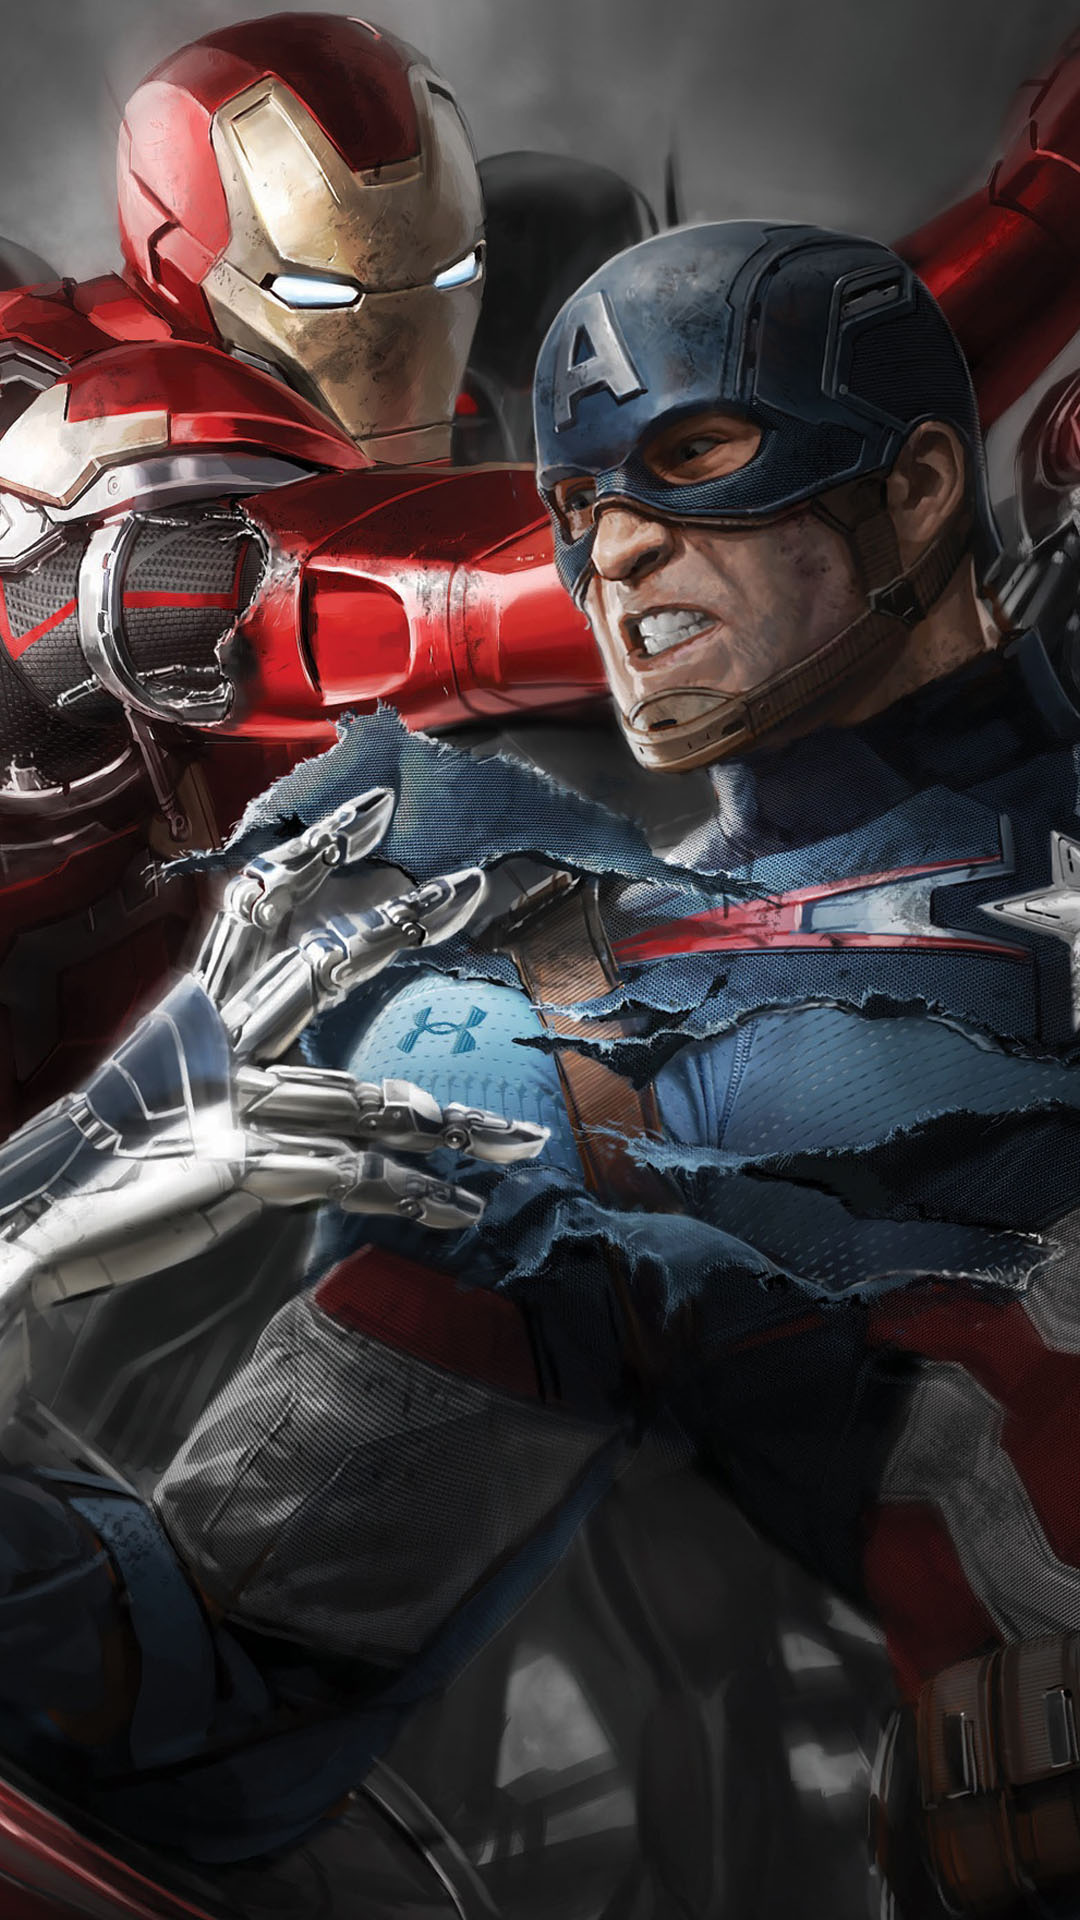 Avengers 2 Age of Ultron Artwork iPhone 6 / 6 Plus and iPhone 5/4 ...